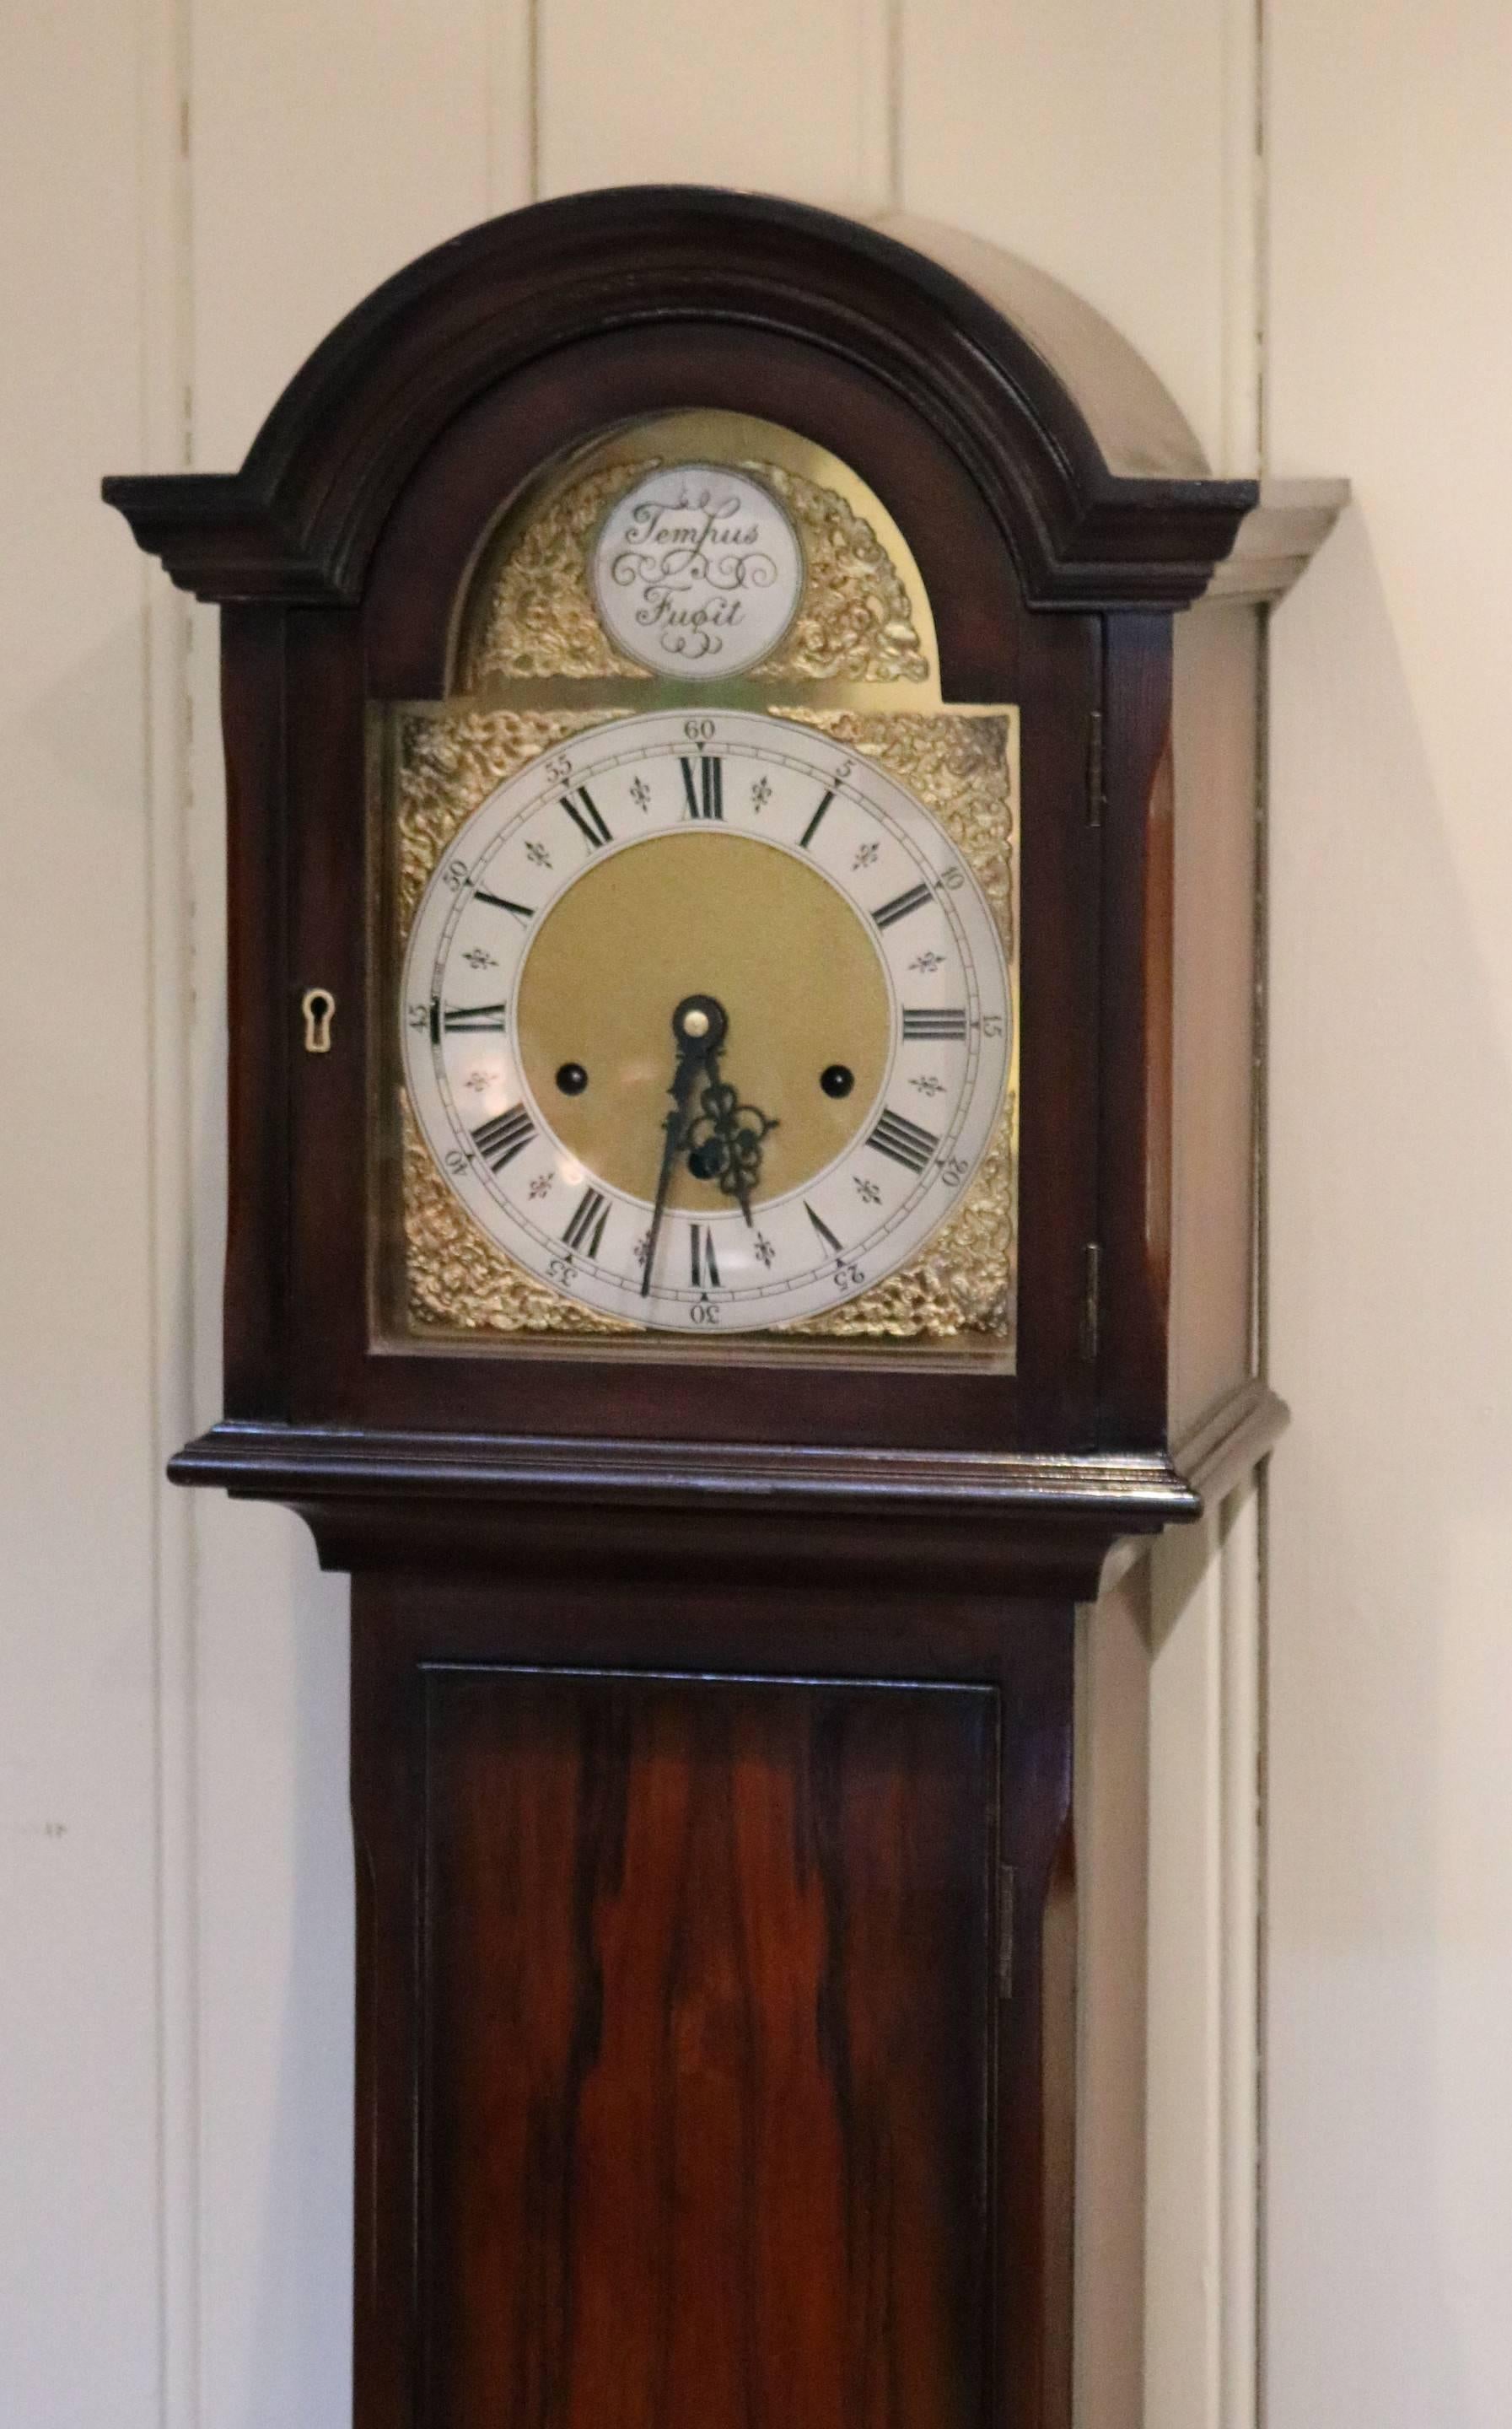 A walnut cased Westminster chime Grandmother clock in the 18th century style dating to George VI period. It has a break arch hood, chamfered corners and a long door with a shaped plinth. The brass dial has a silvered chapter ring and a tempus fugit